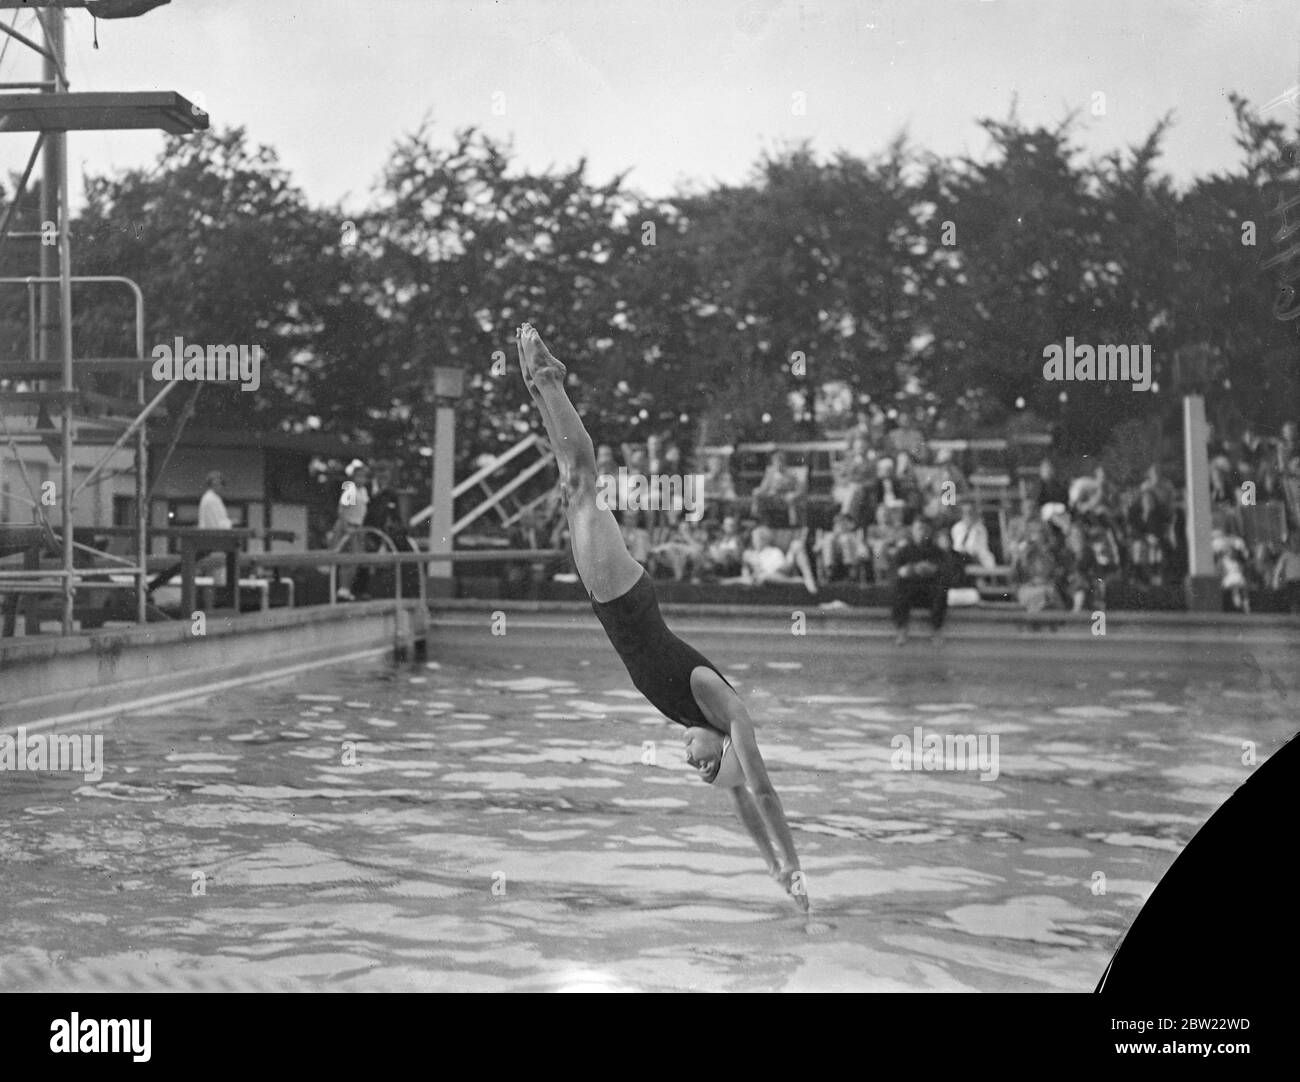 Head tucked wall in to make her body an unbrocken line, T. Cannell enters the water in a perfect dive at the Kingfishers' pool, at Woodford, Essex. 19 September 1937. Stock Photo